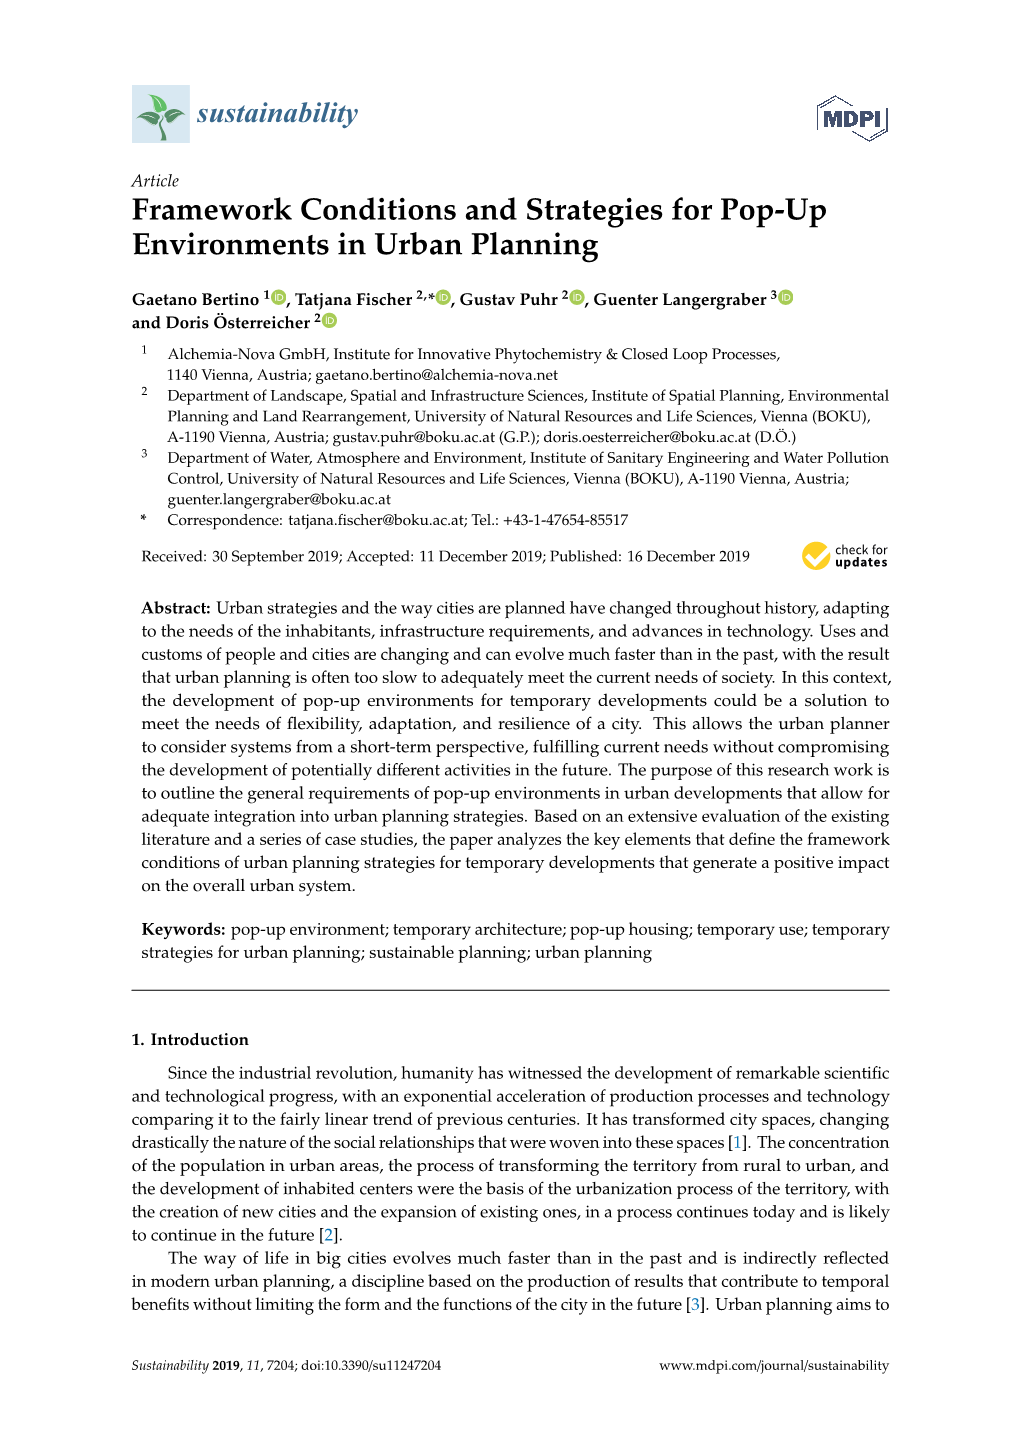 Framework Conditions and Strategies for Pop-Up Environments in Urban Planning